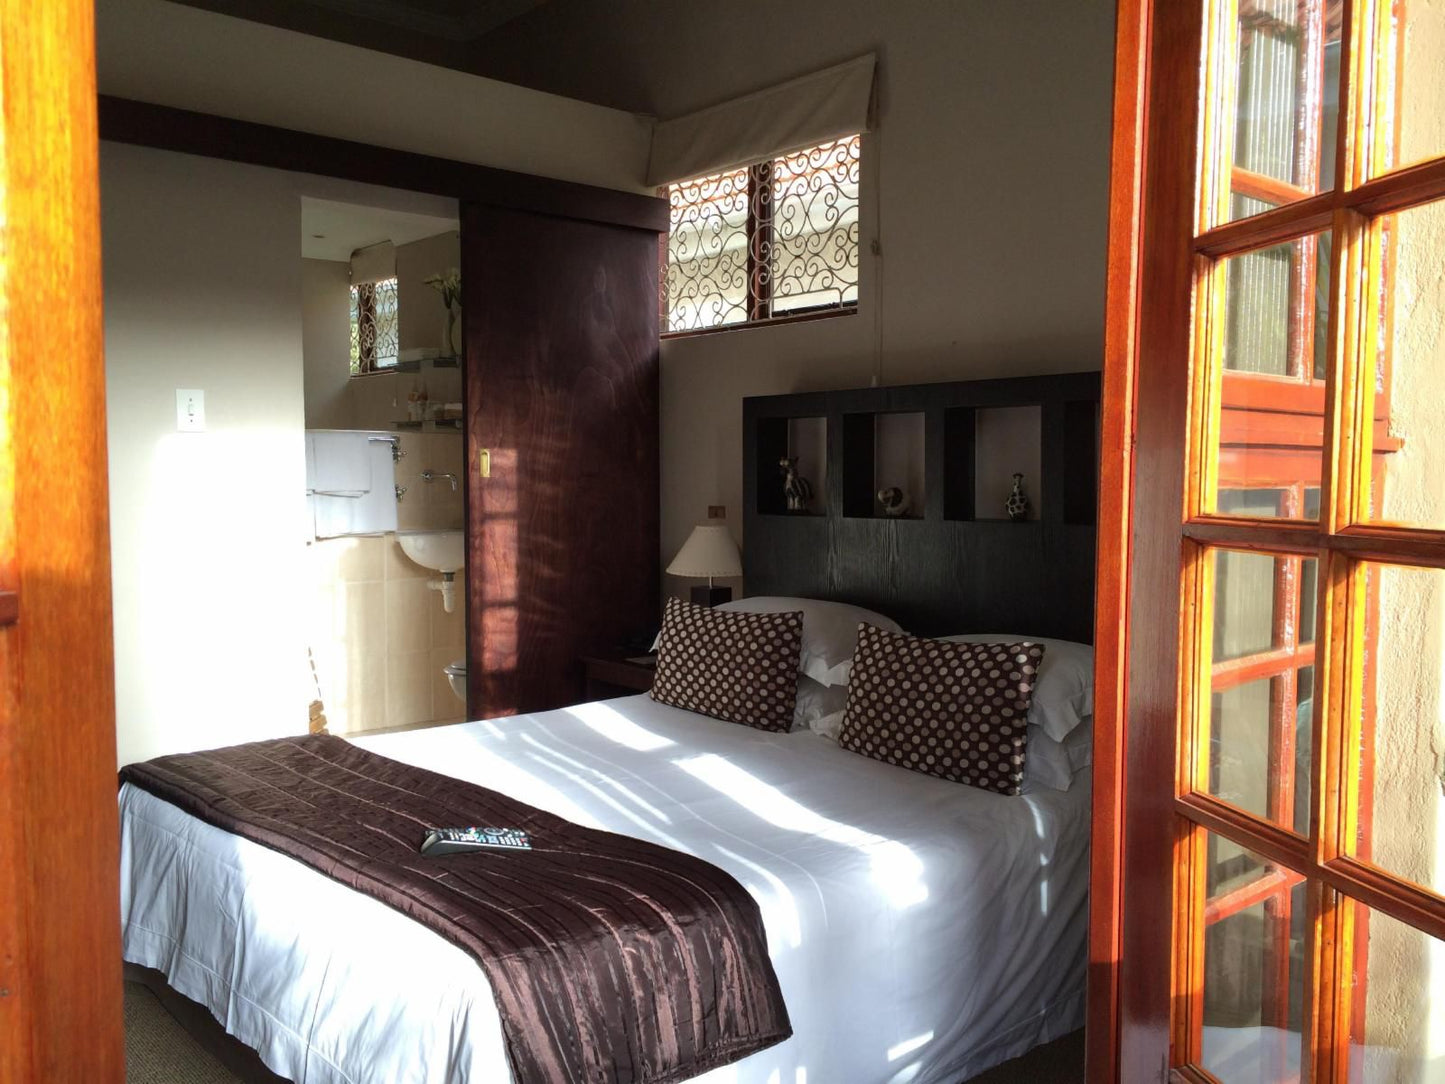 Olaf S Guesthouse Sea Point Cape Town Western Cape South Africa Bedroom